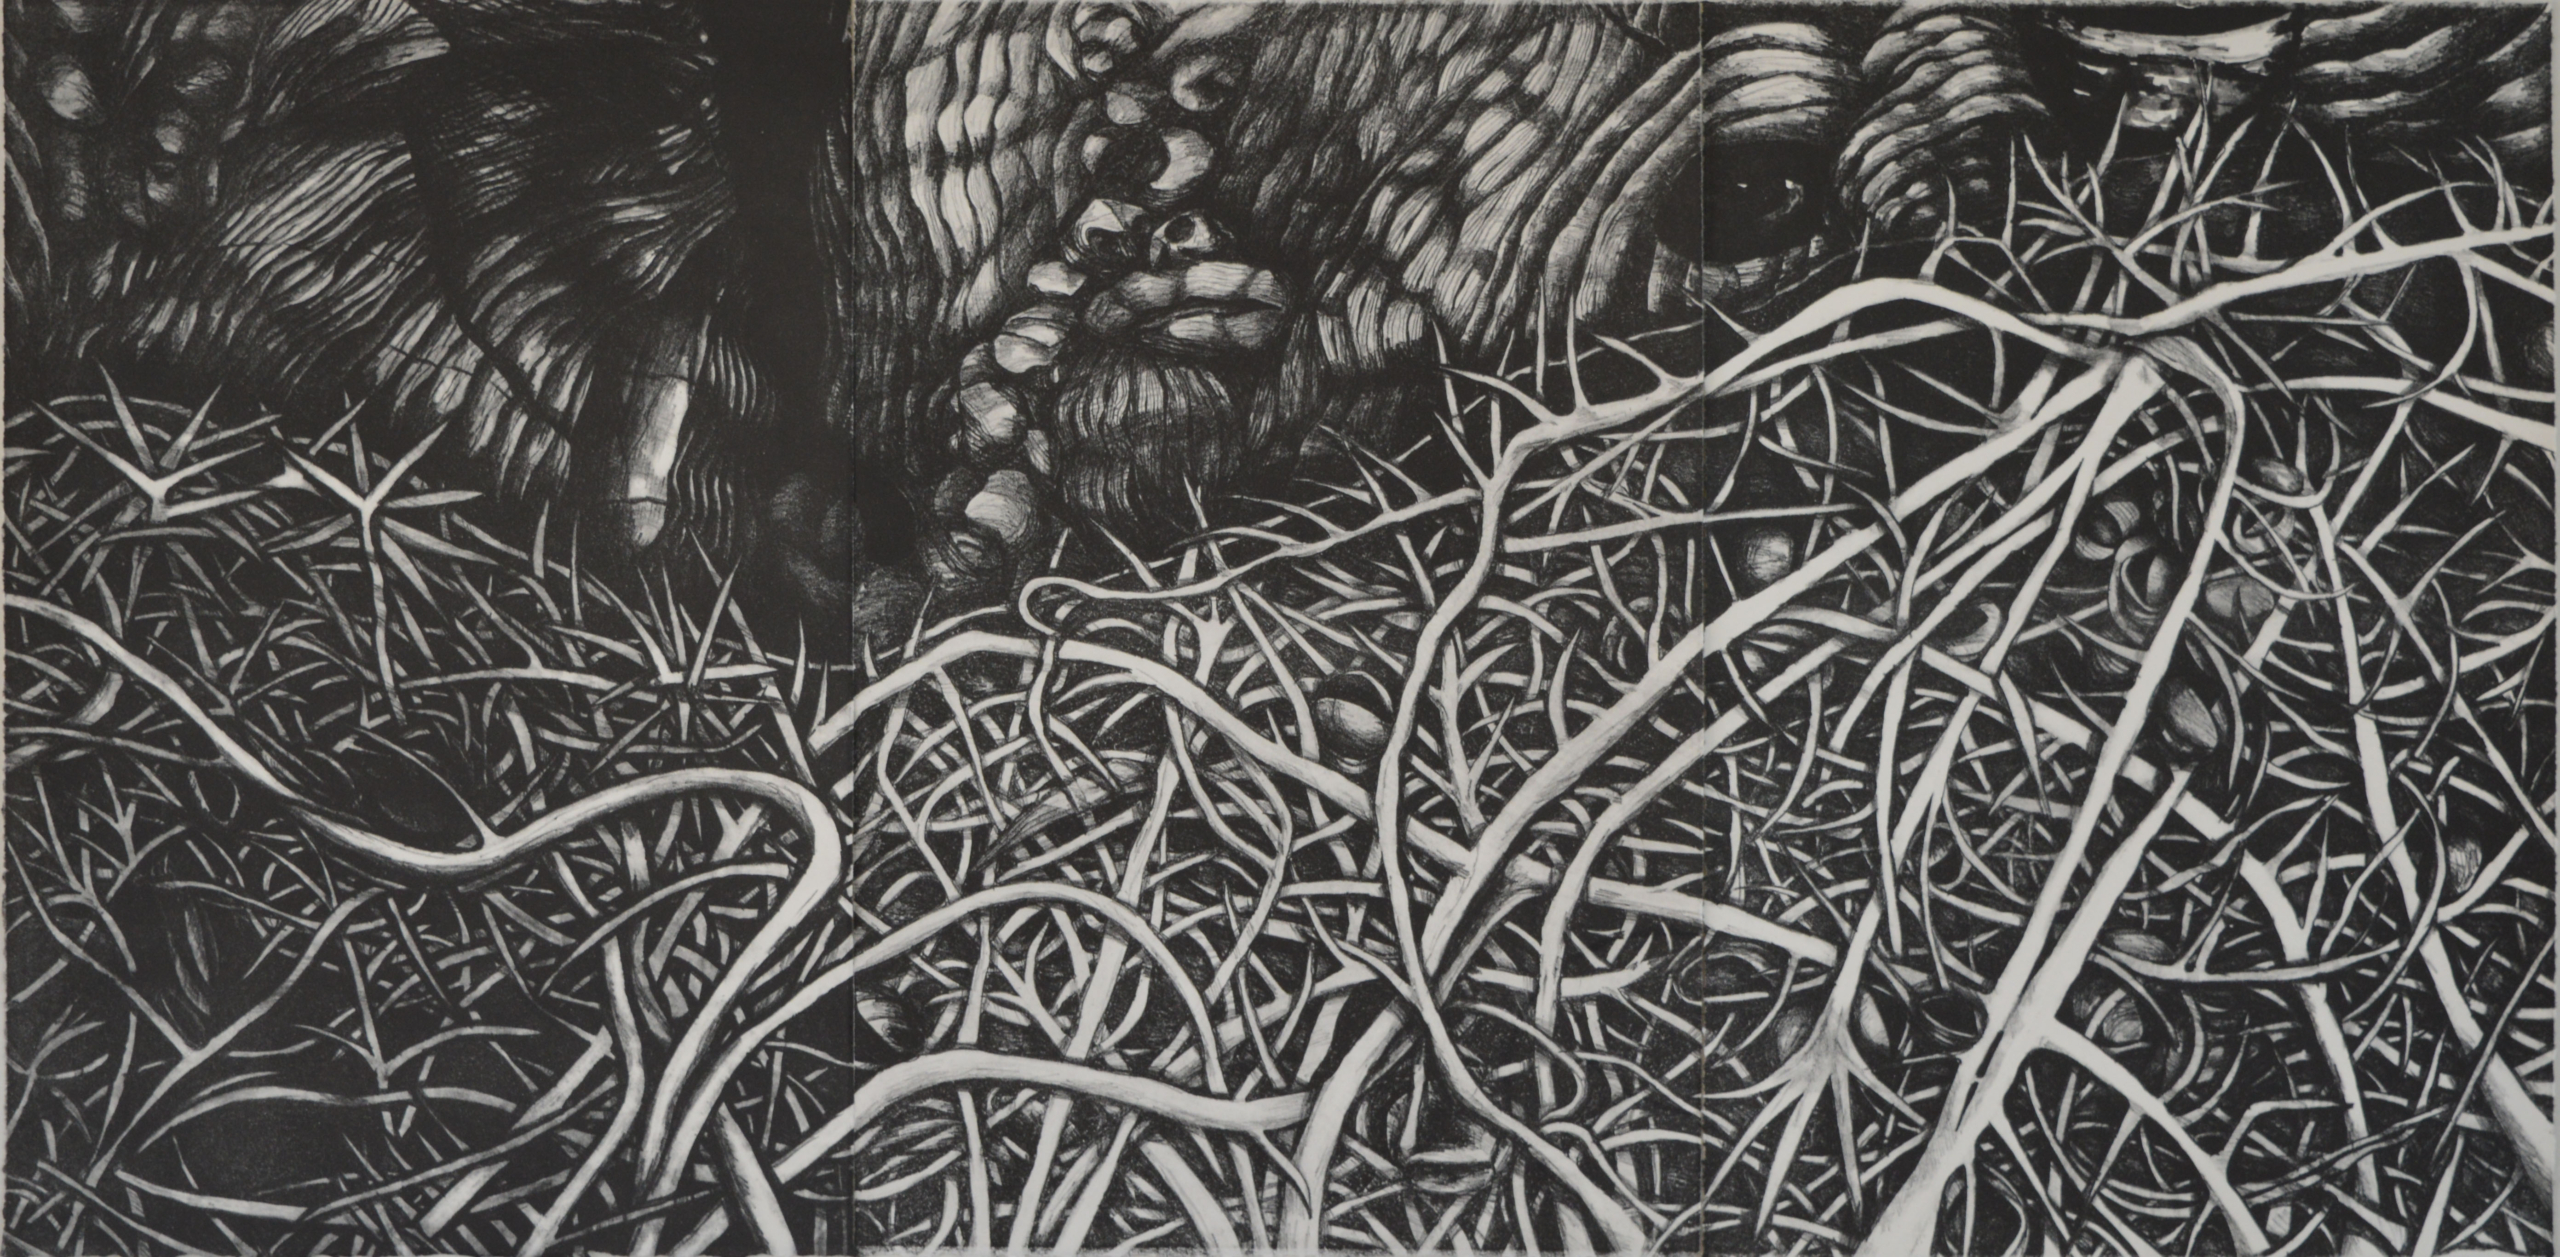 COVID Anxiety, triptych lithograph on paper by Jacqui Driver